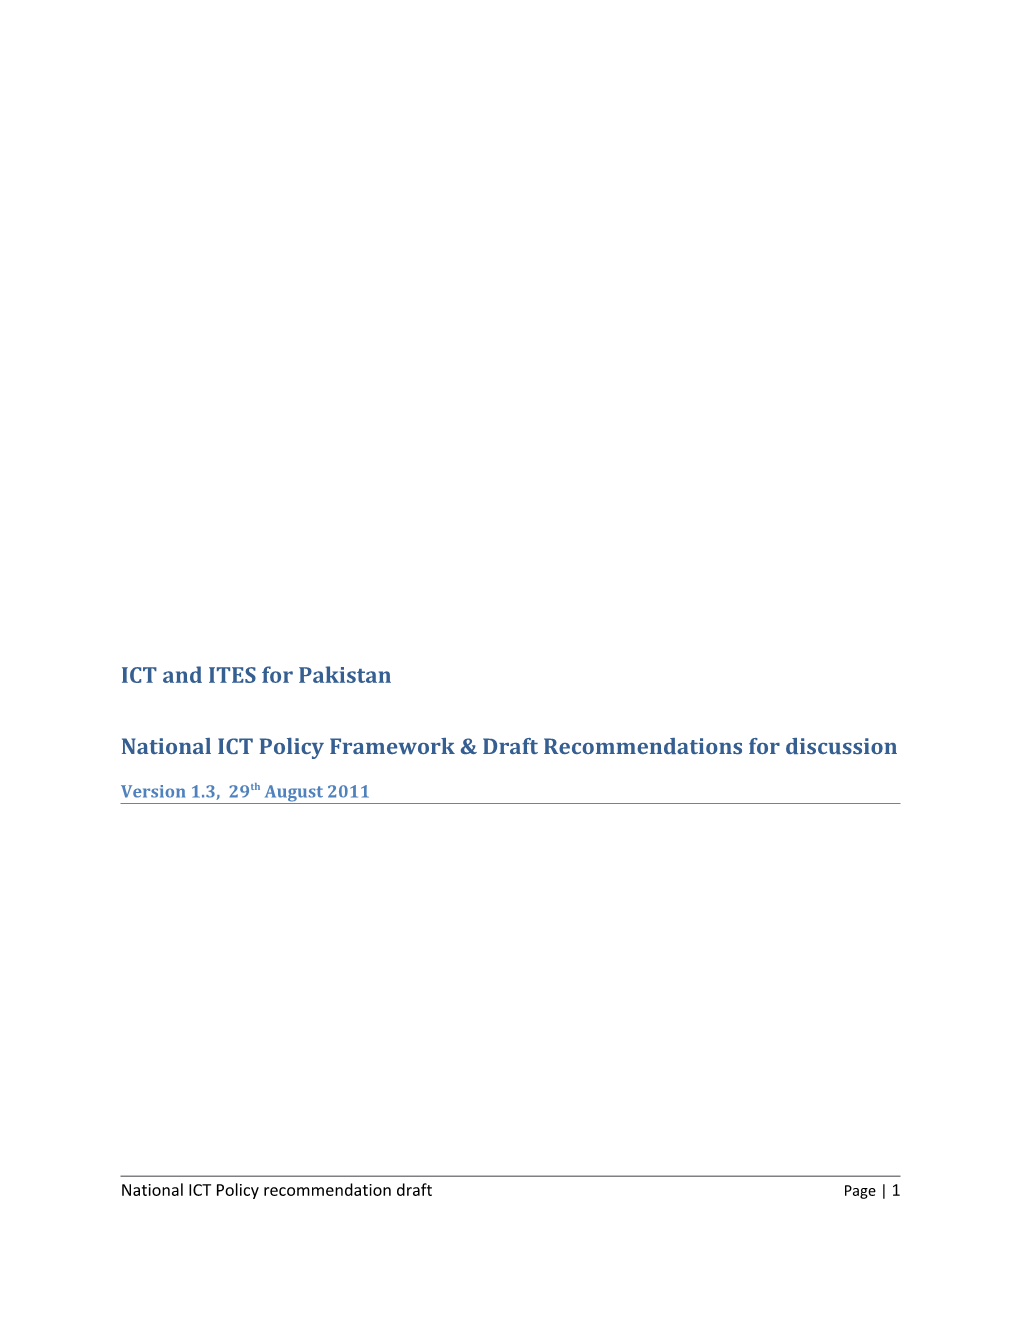 ICT and ITES for Pakistan